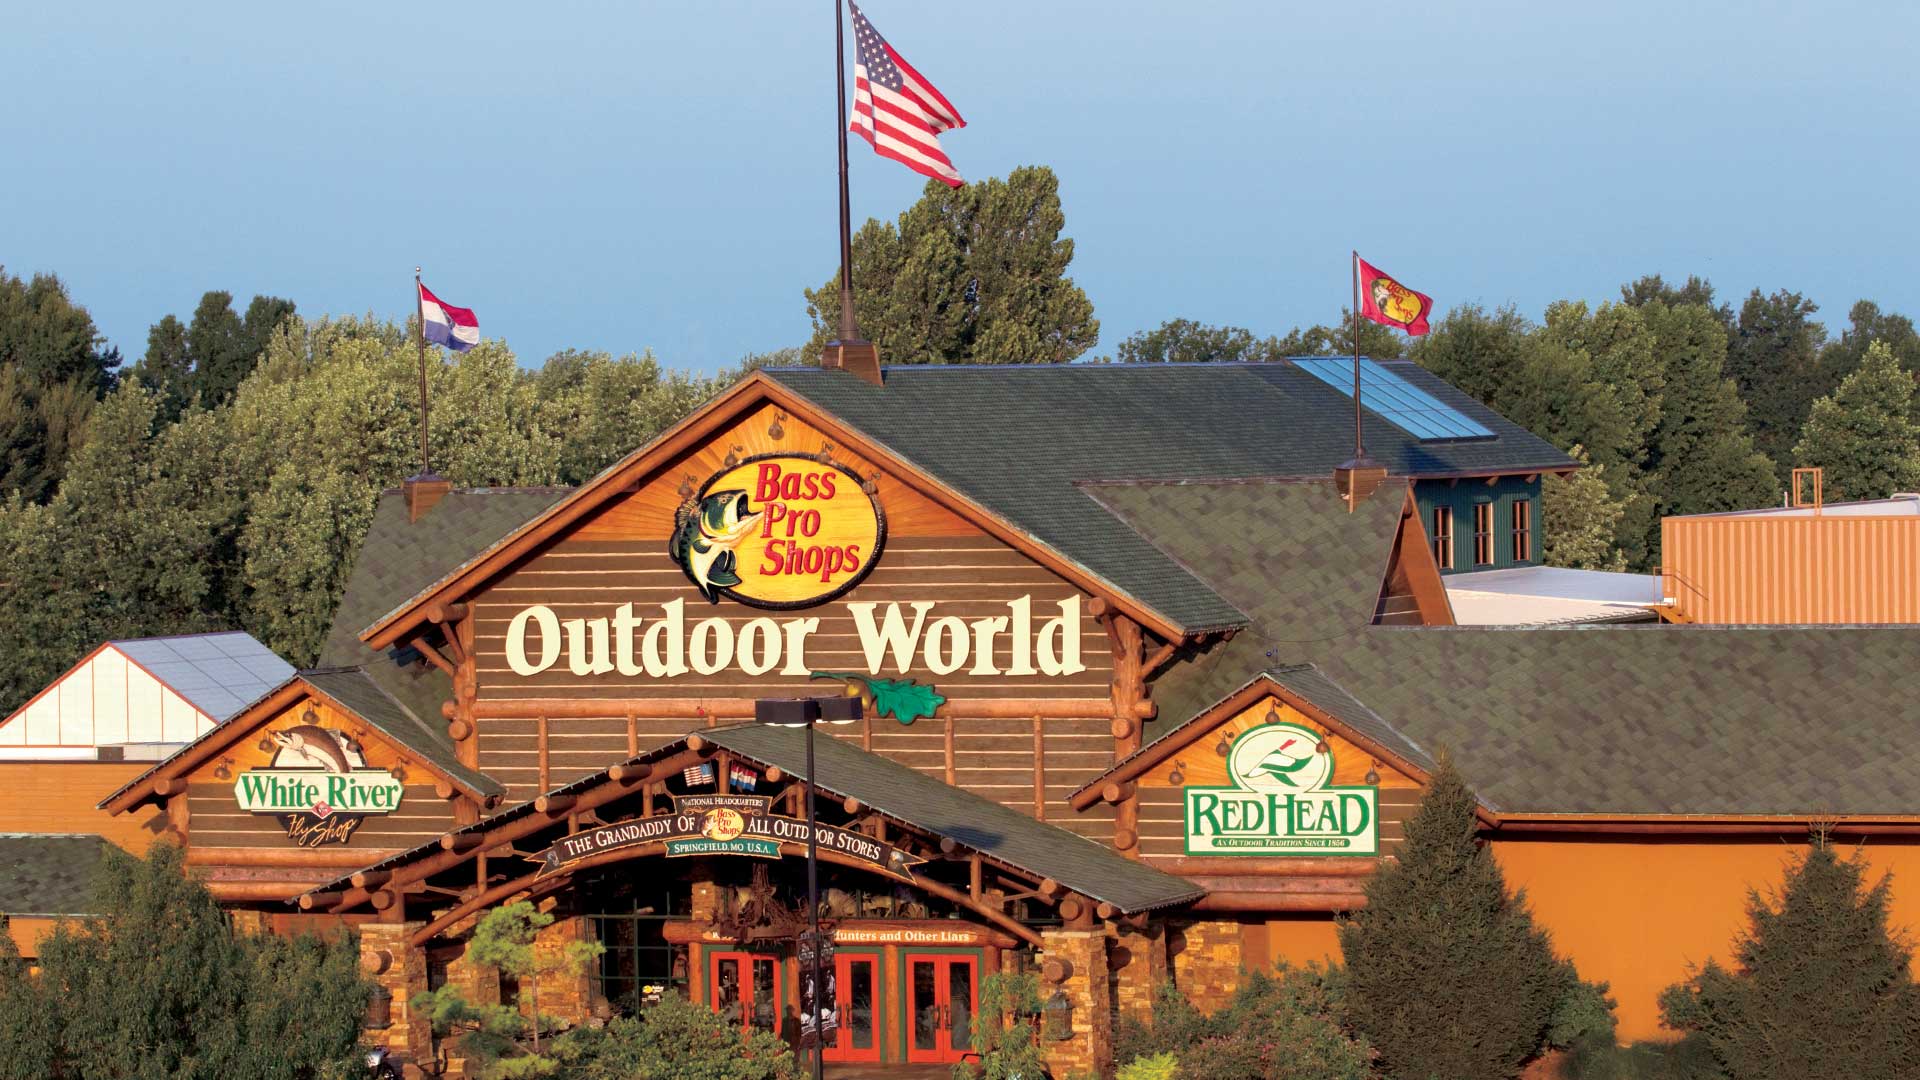 Bass Pro Shops stores like this navigated the COVID-19 pandemic with location intelligence